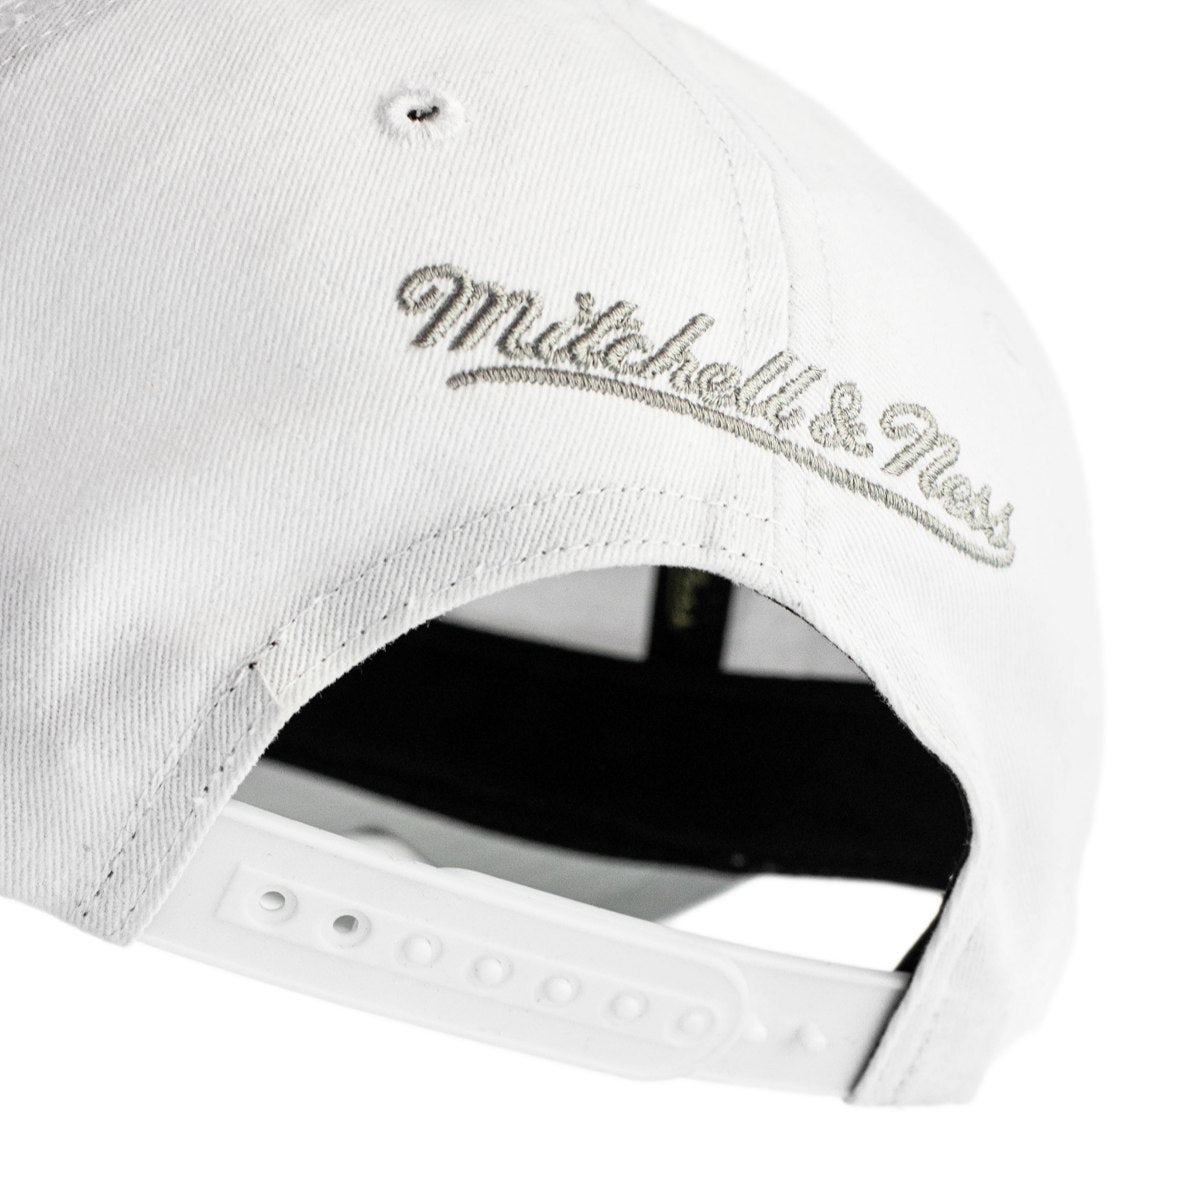 Mitchell & Ness Los Angeles Kings NHL All in Pro Snapback Cap HHSS5758-LAKYYPPPWHIT-